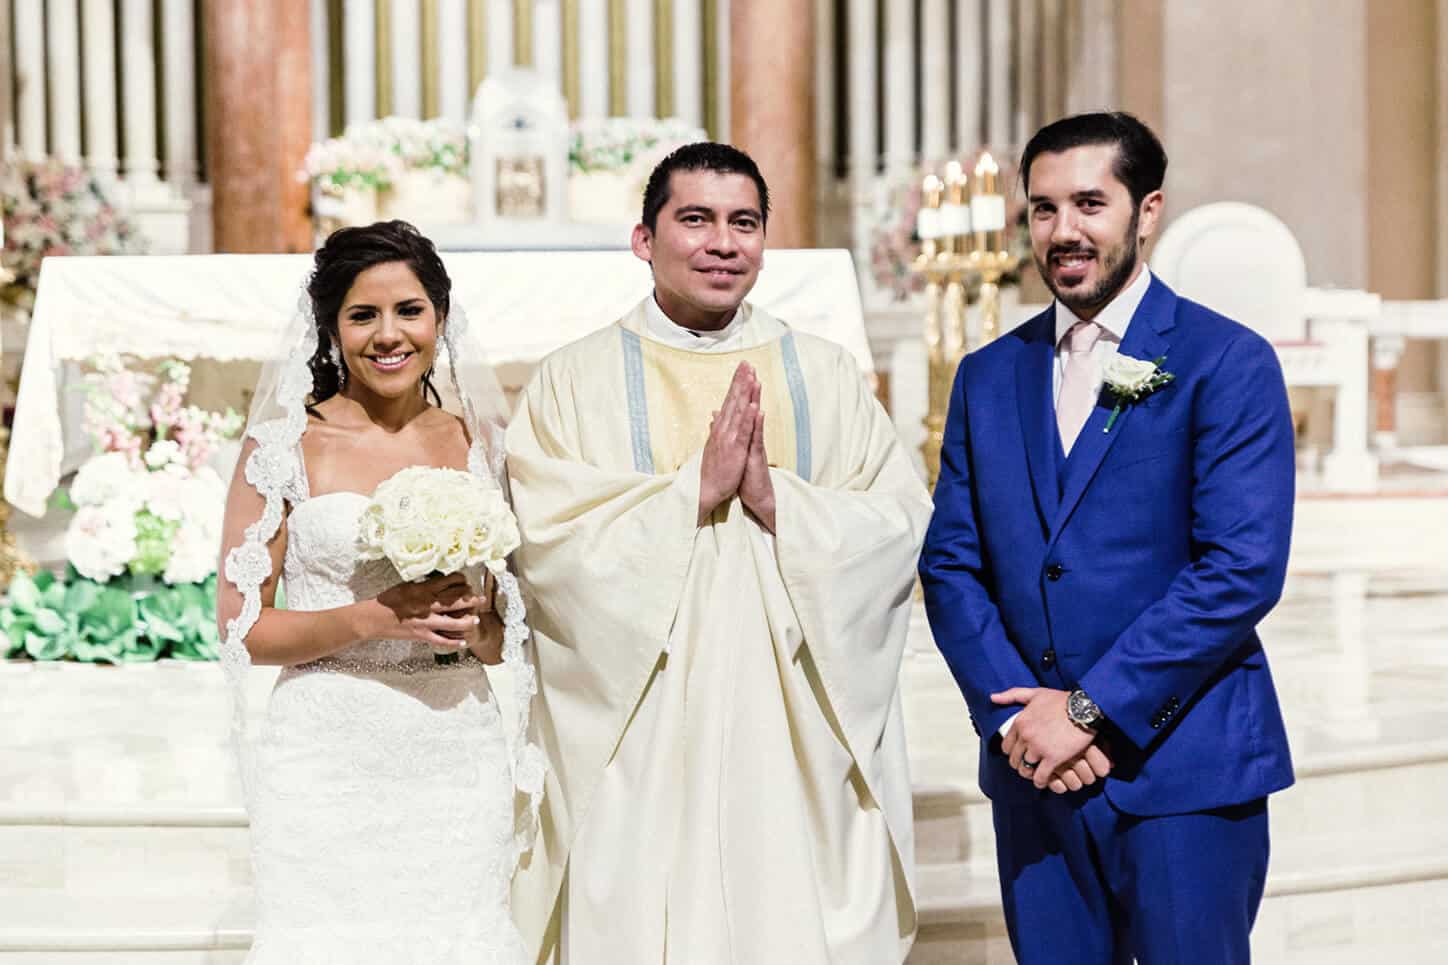 Wedding Party Photo of Bride and Groom With Their Priest